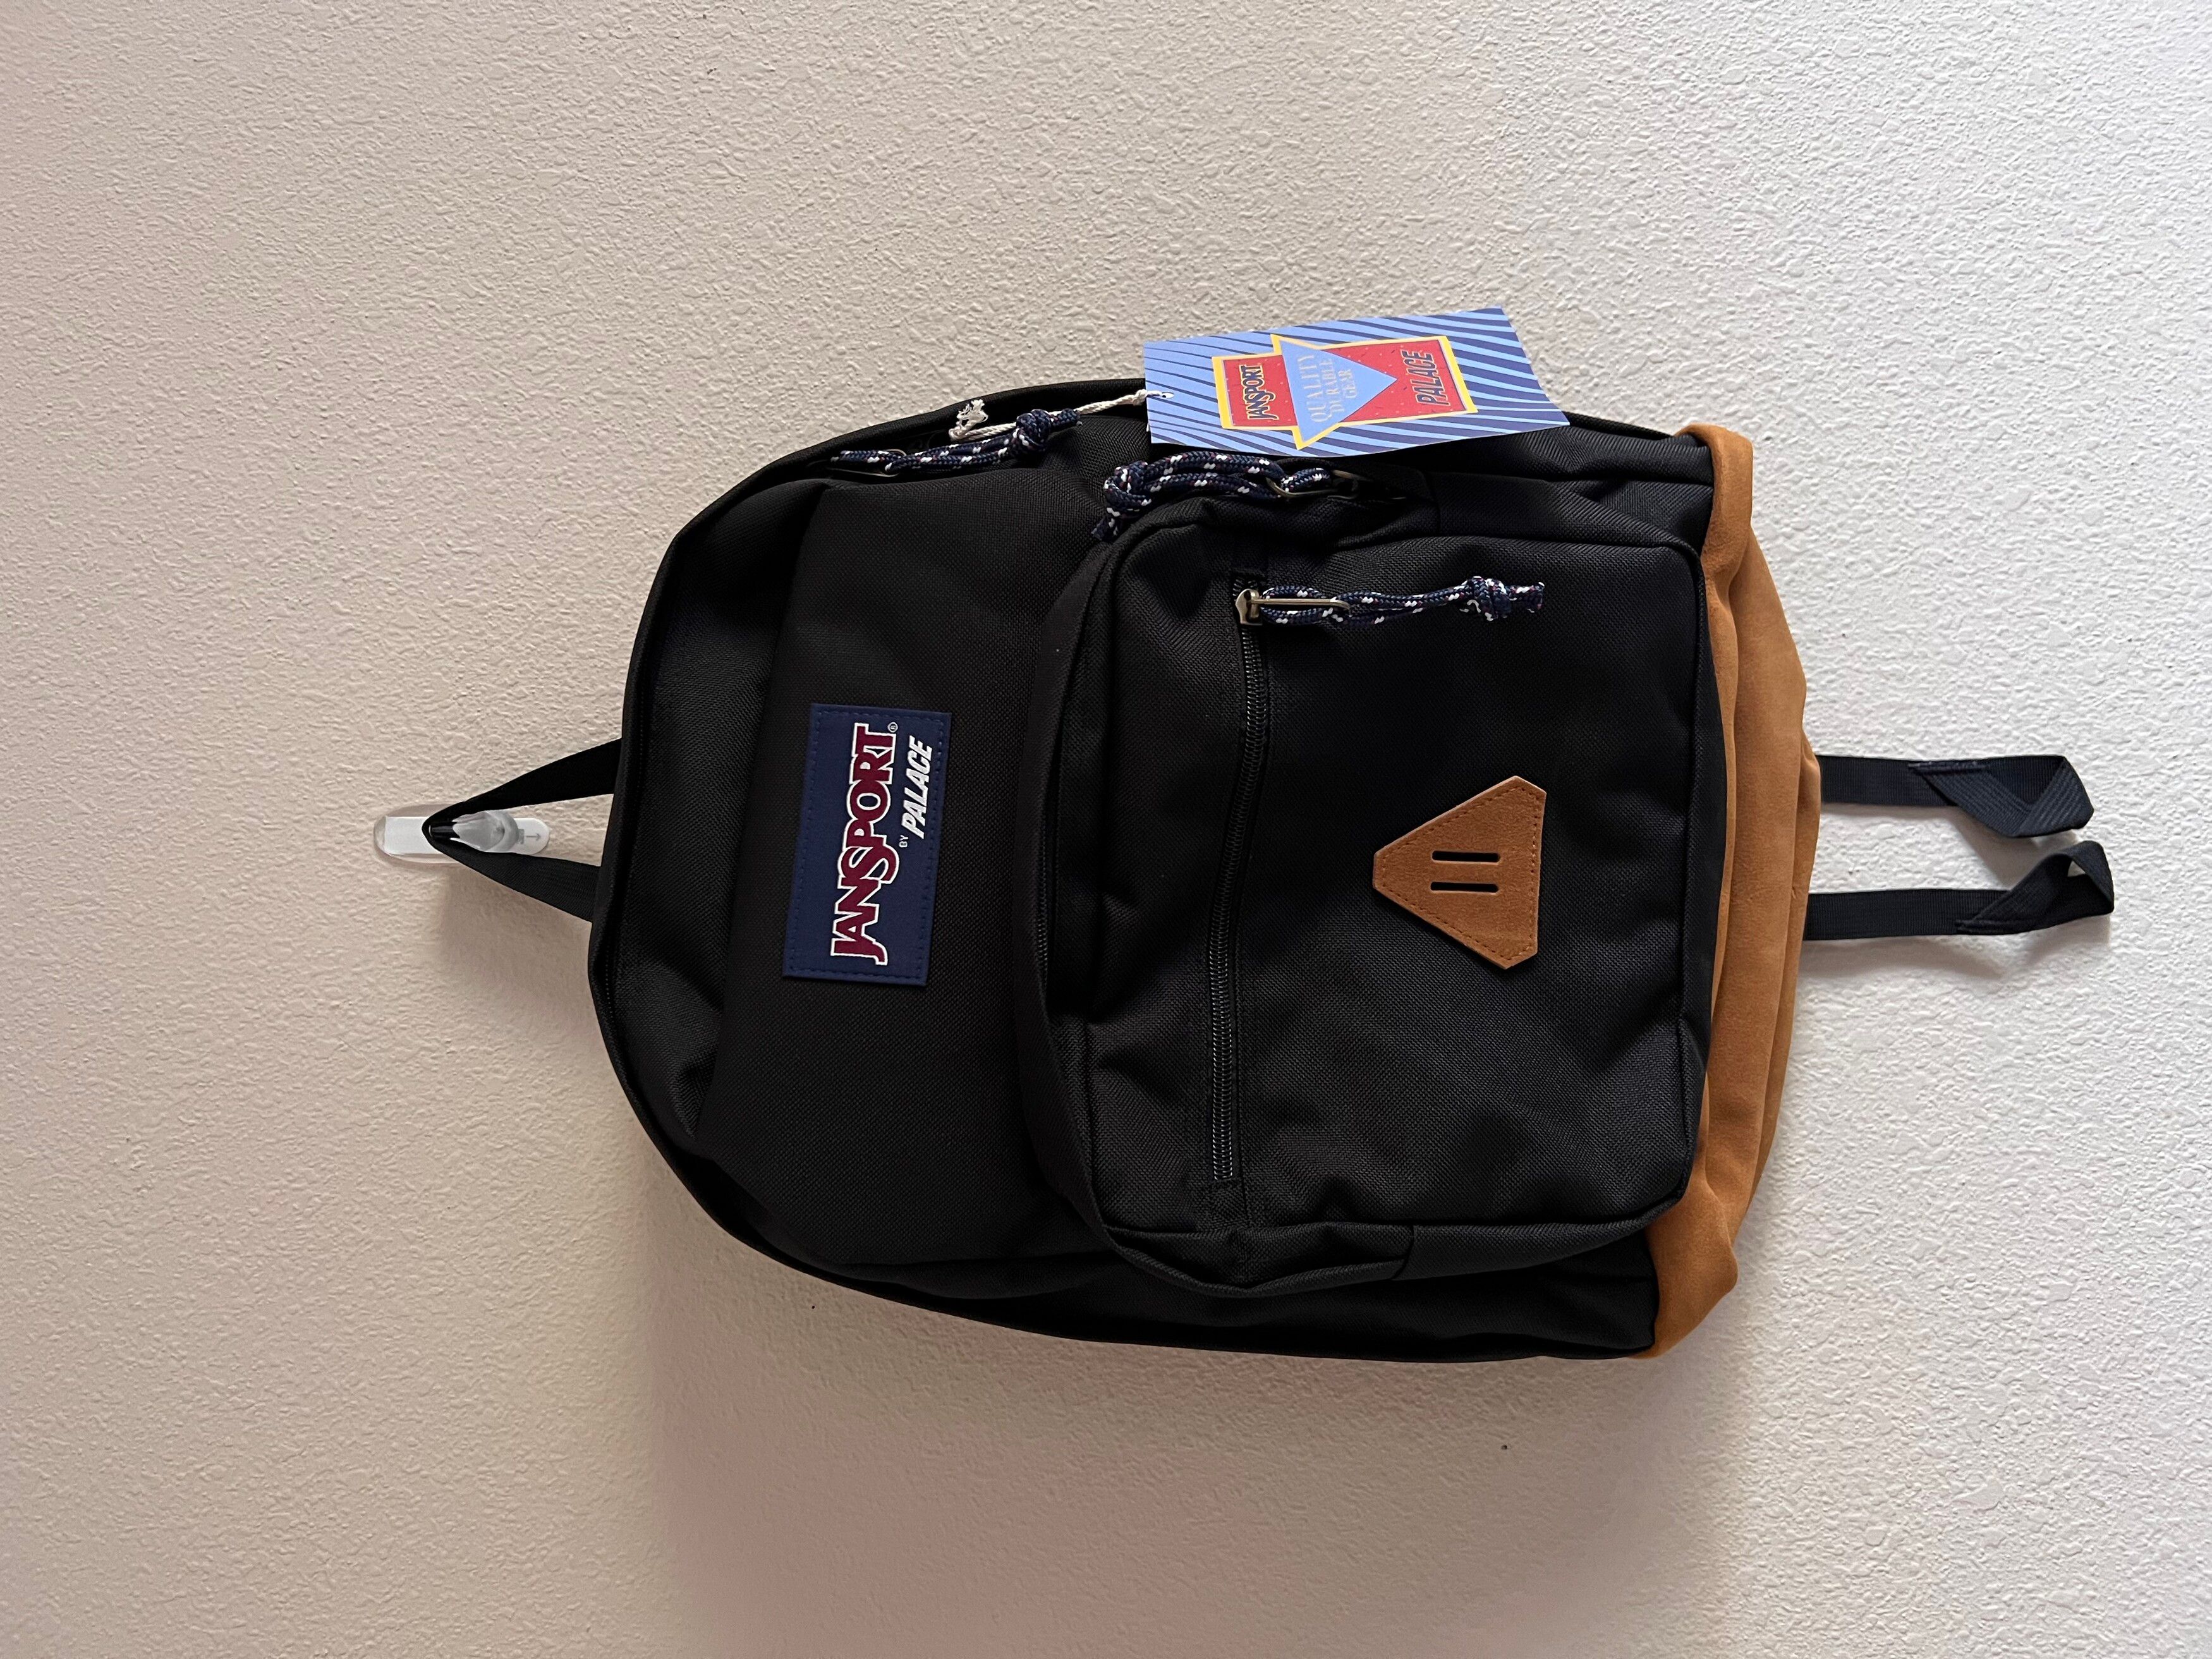 Pre-owned Jansport X Palace Jansport Right Pack Backpack In Black